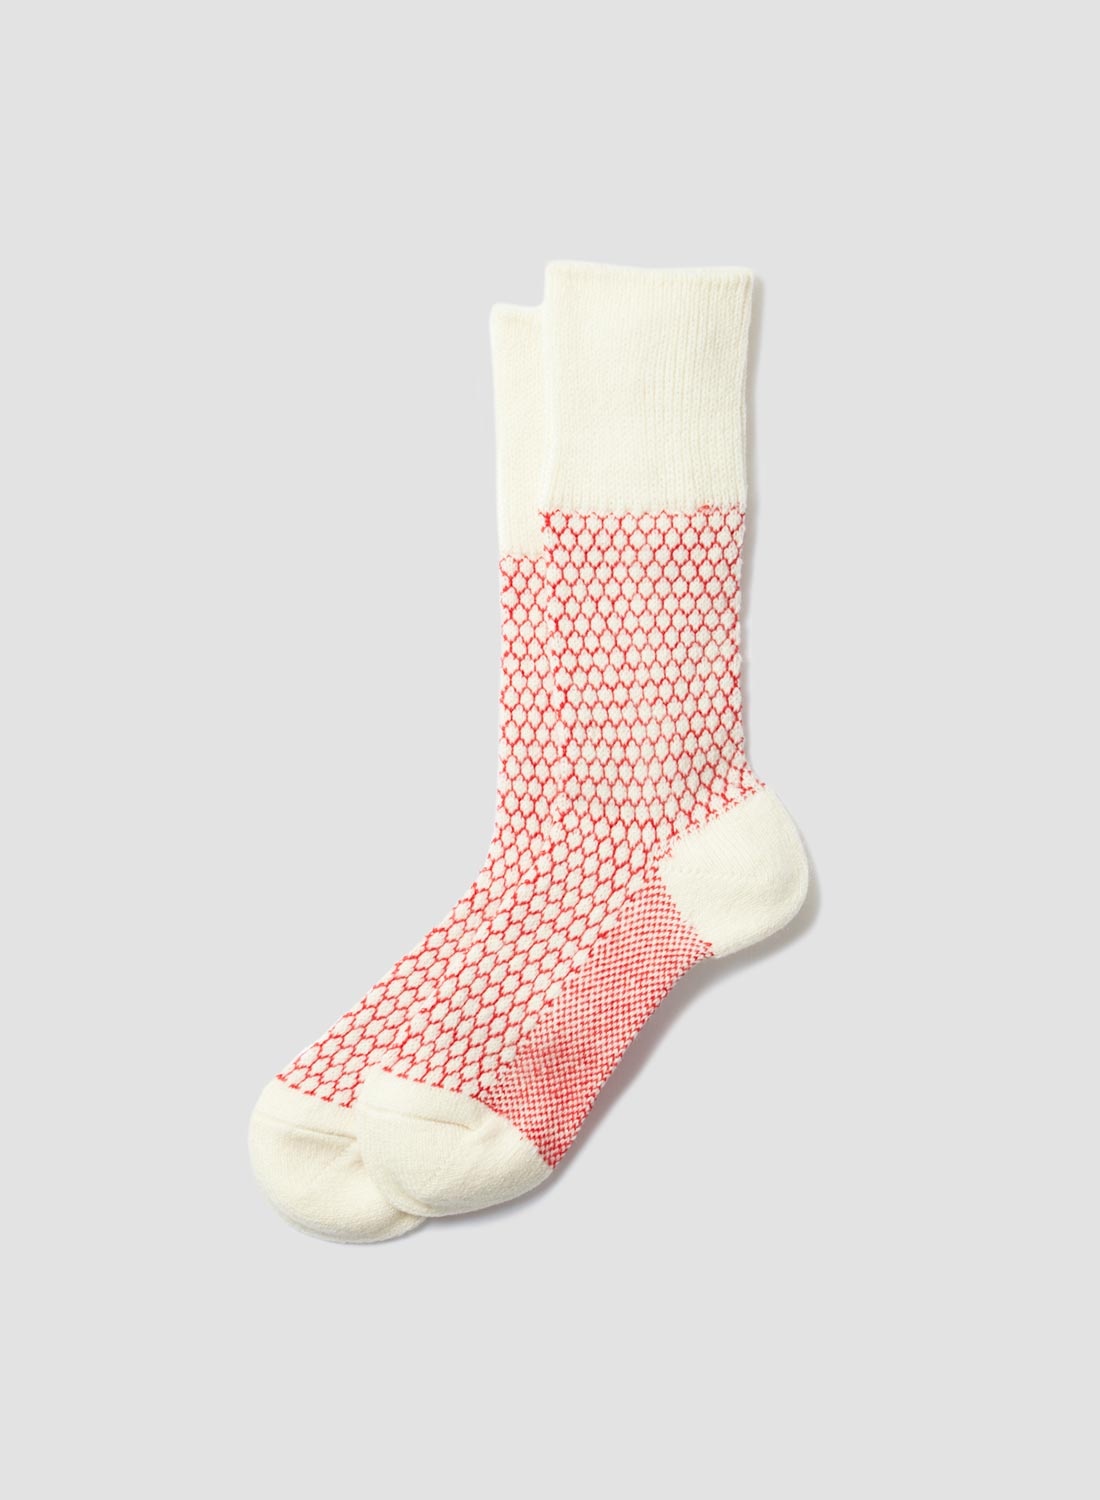 Rototo Woolen Jacquard Crew Sock in Ivory/Red - 1